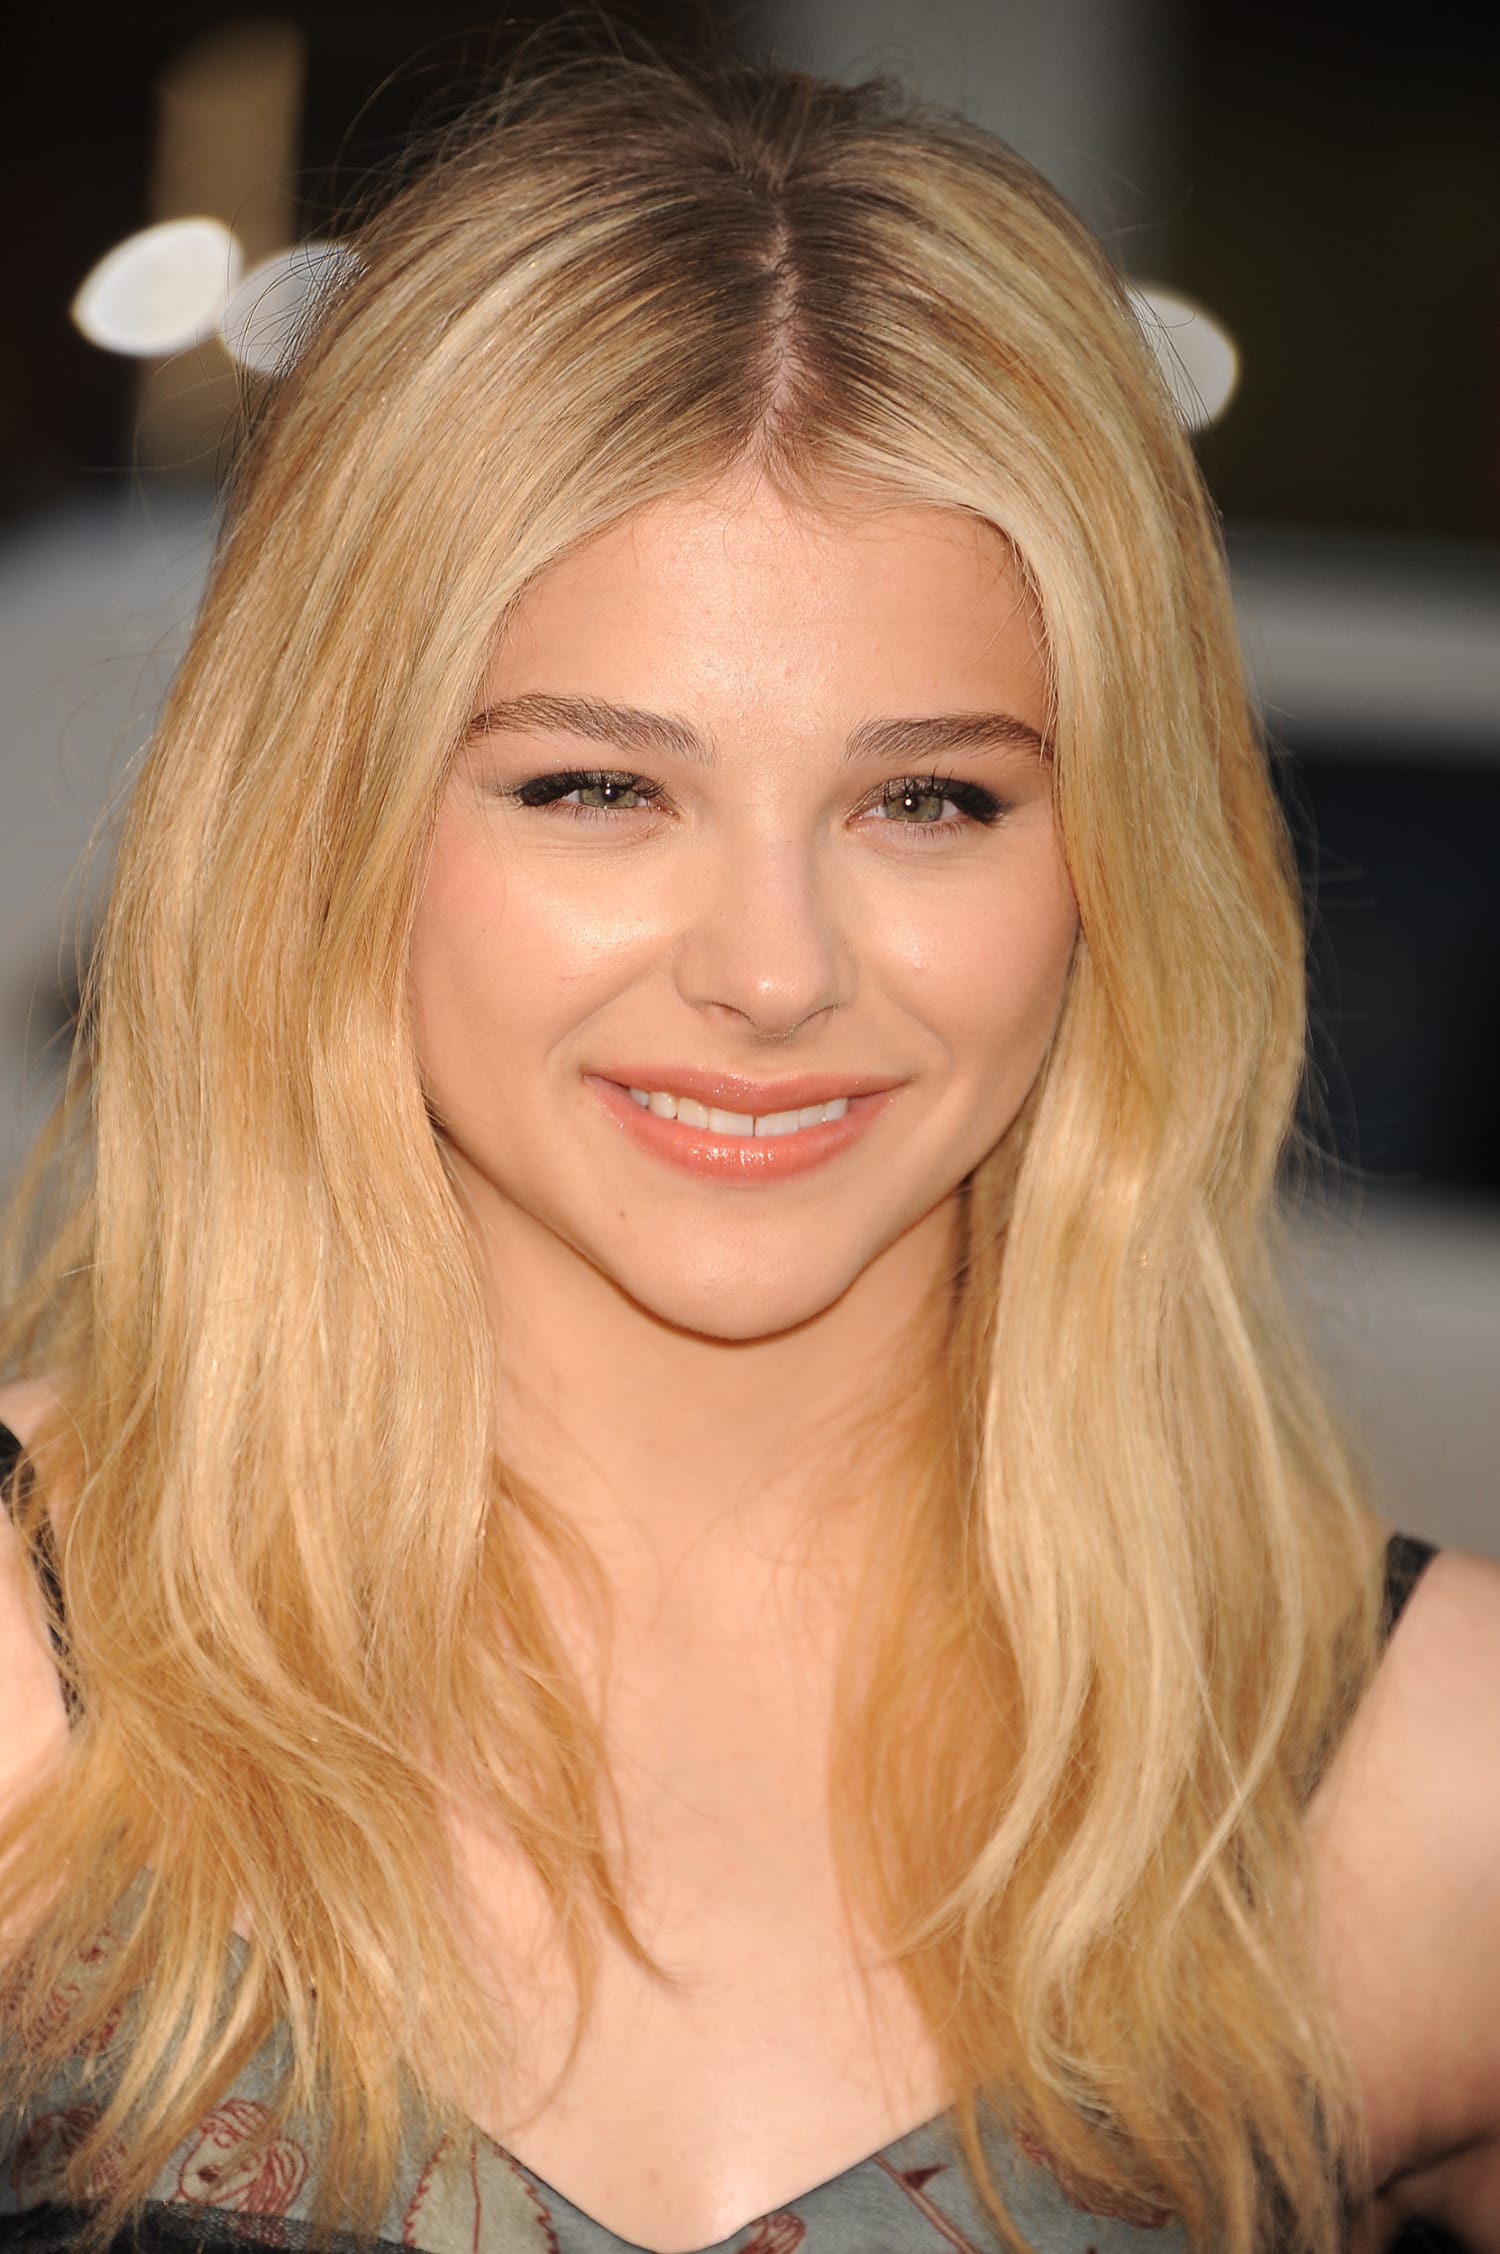 How to Get Chloe Grace Moretz's Eyelashes: Makeup Artist How-To